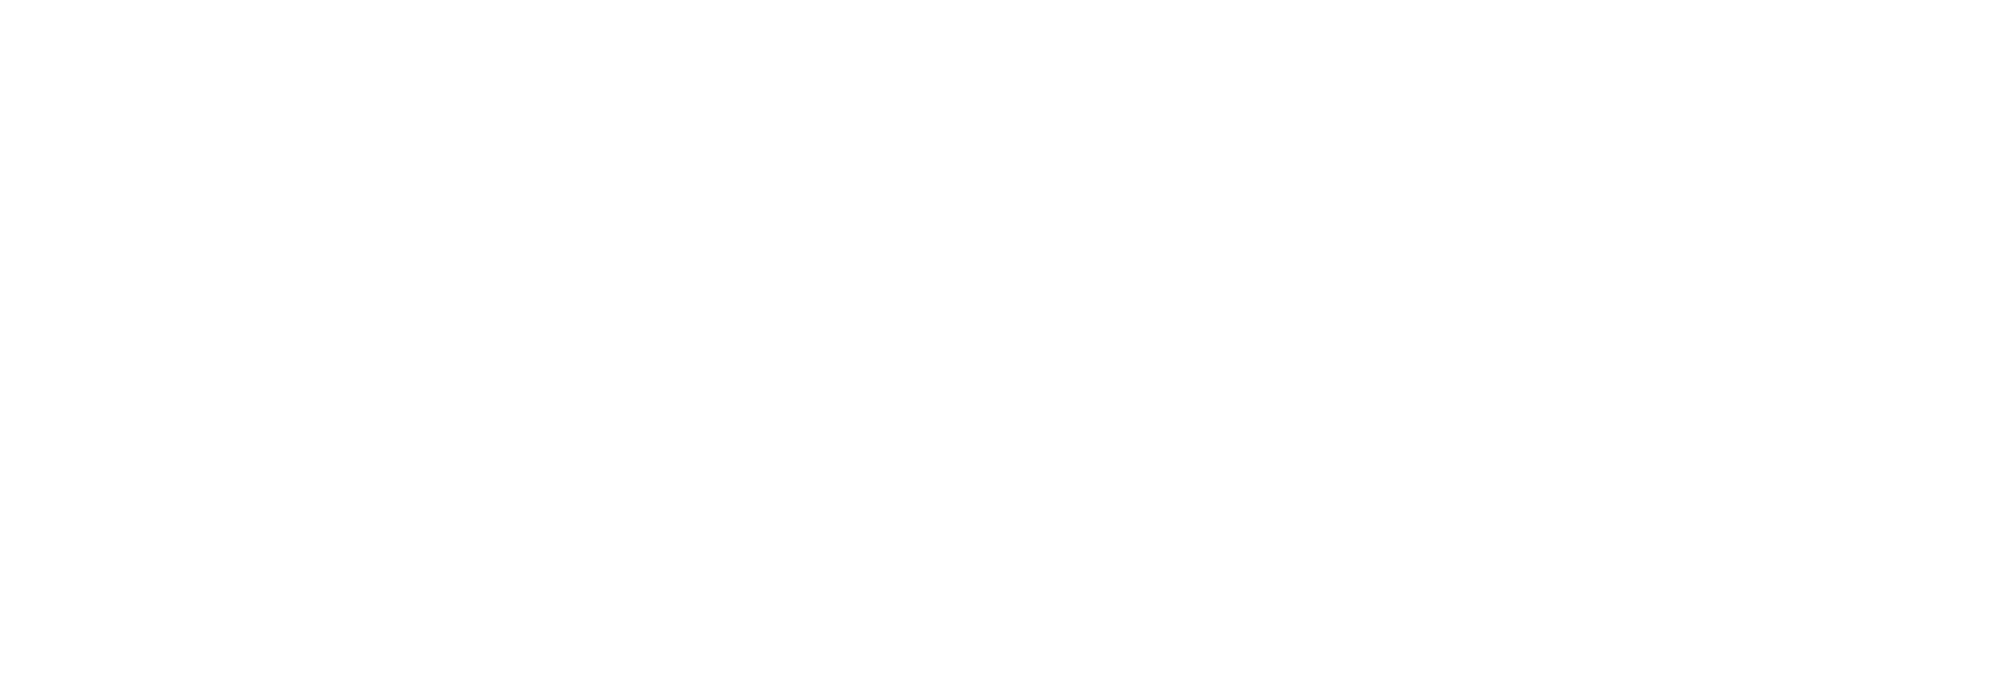 Justice Center: The Council of State Governments